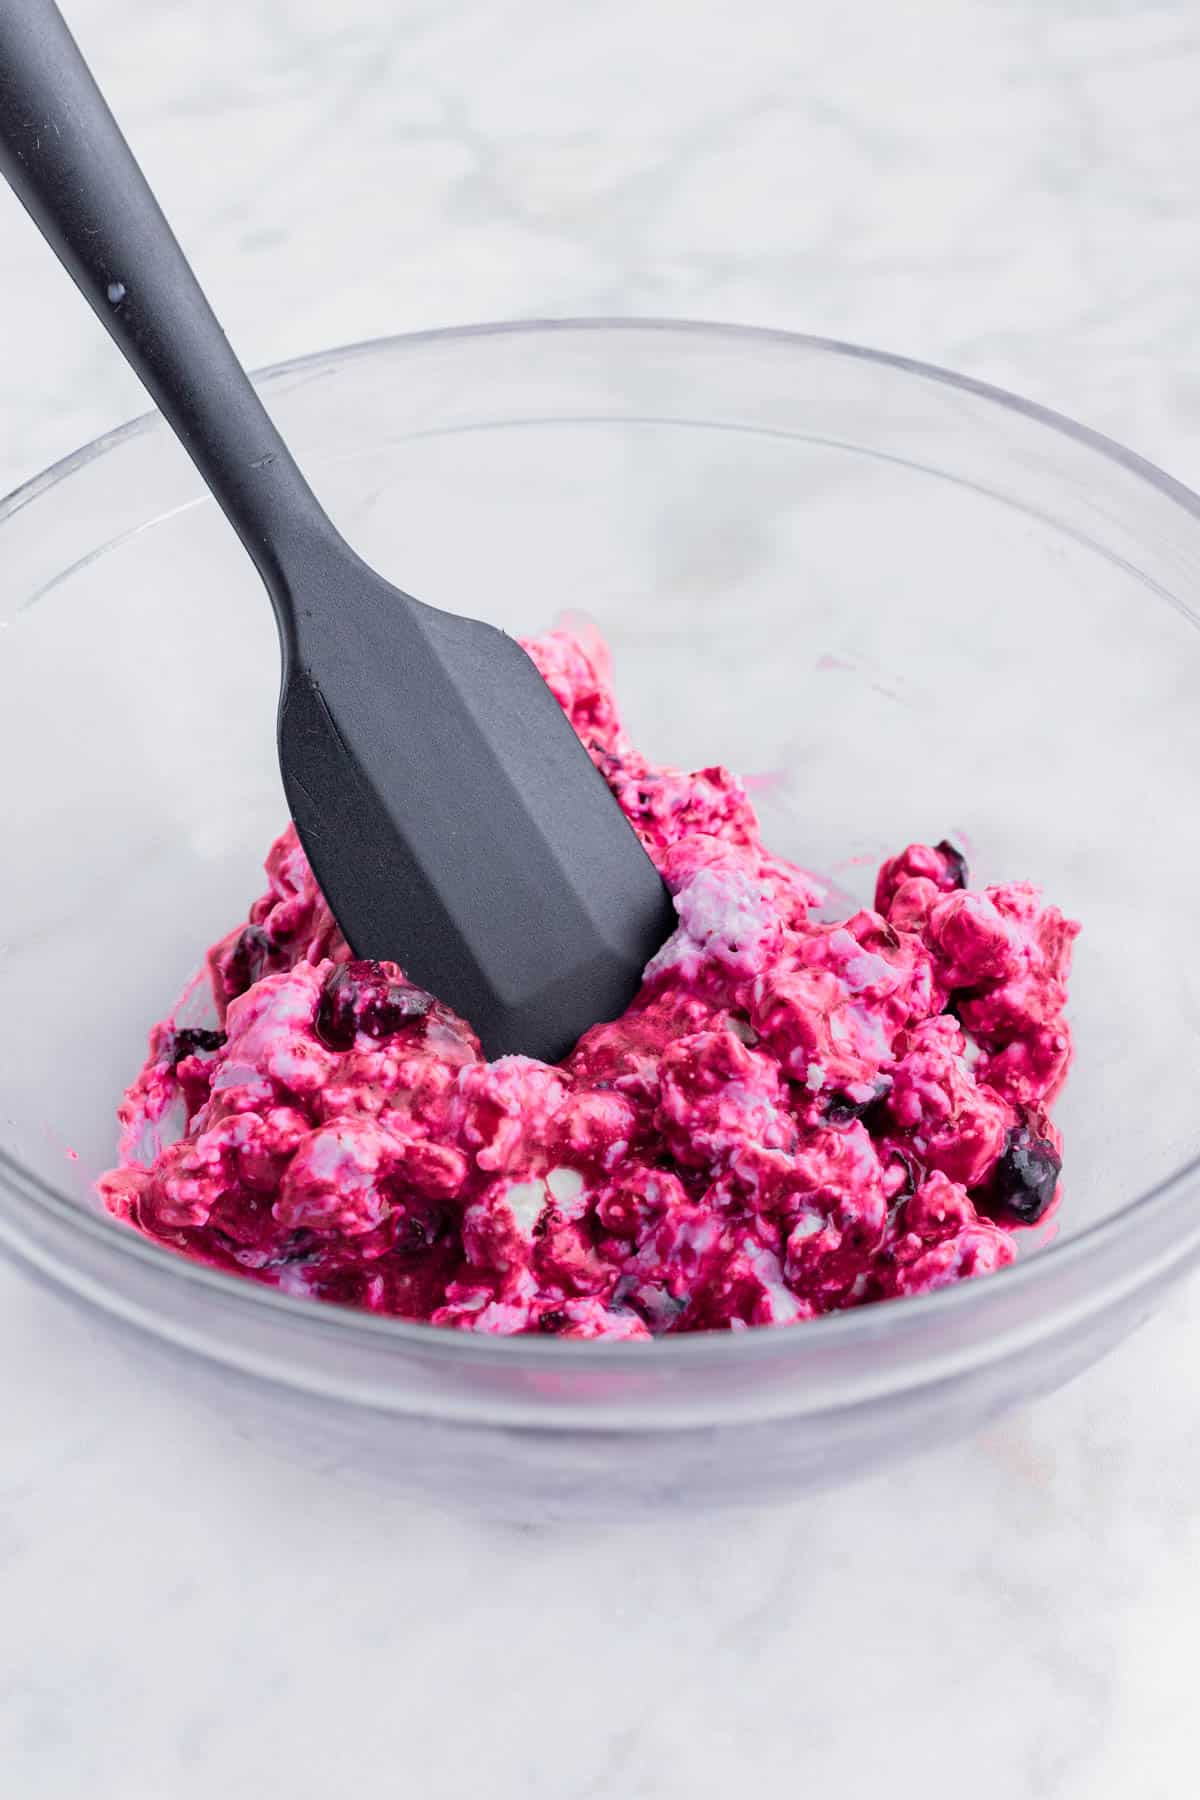 A spatula stirs goat cheese into the blueberry mixture